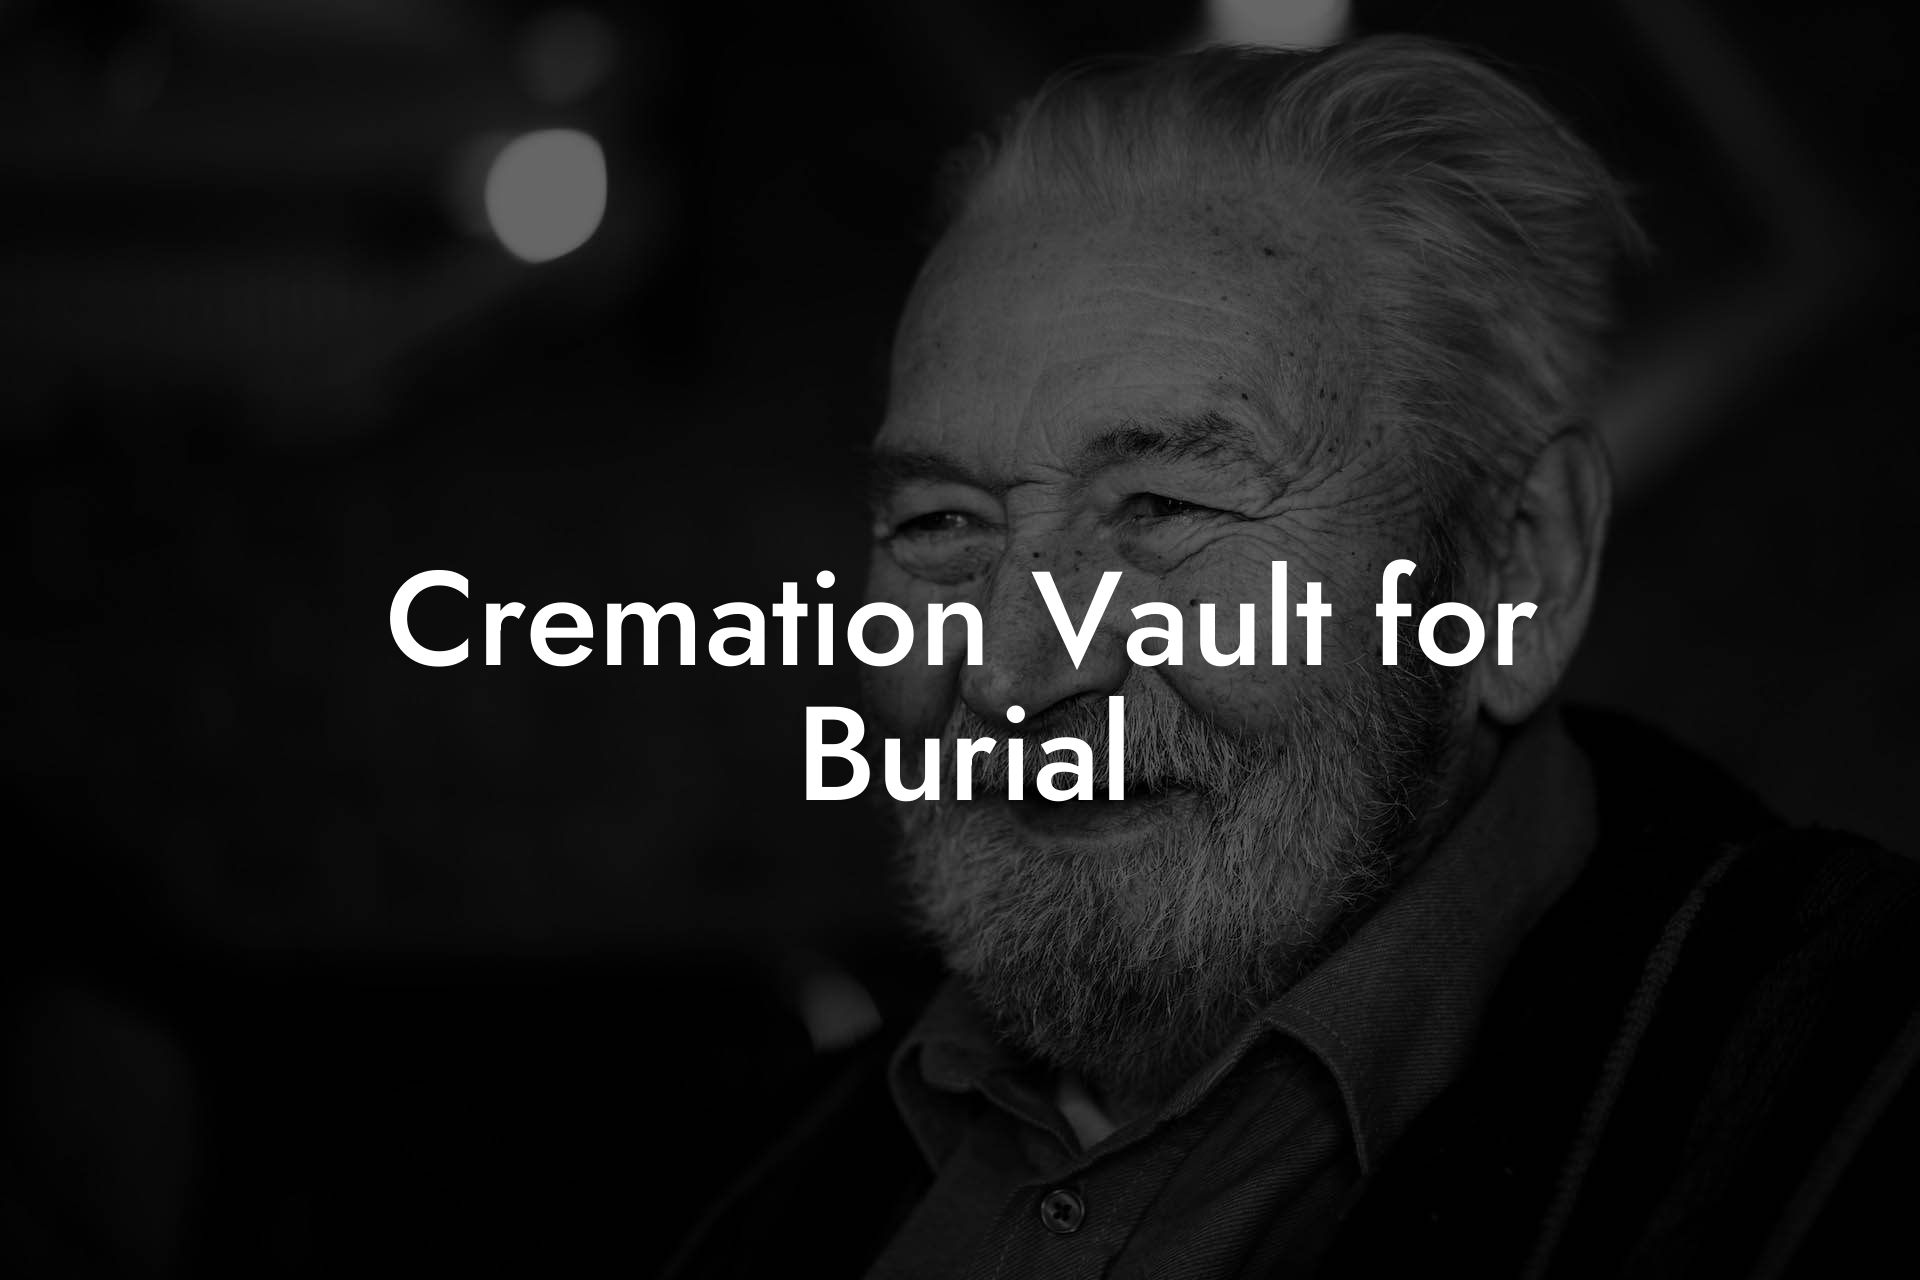 Cremation Vault for Burial